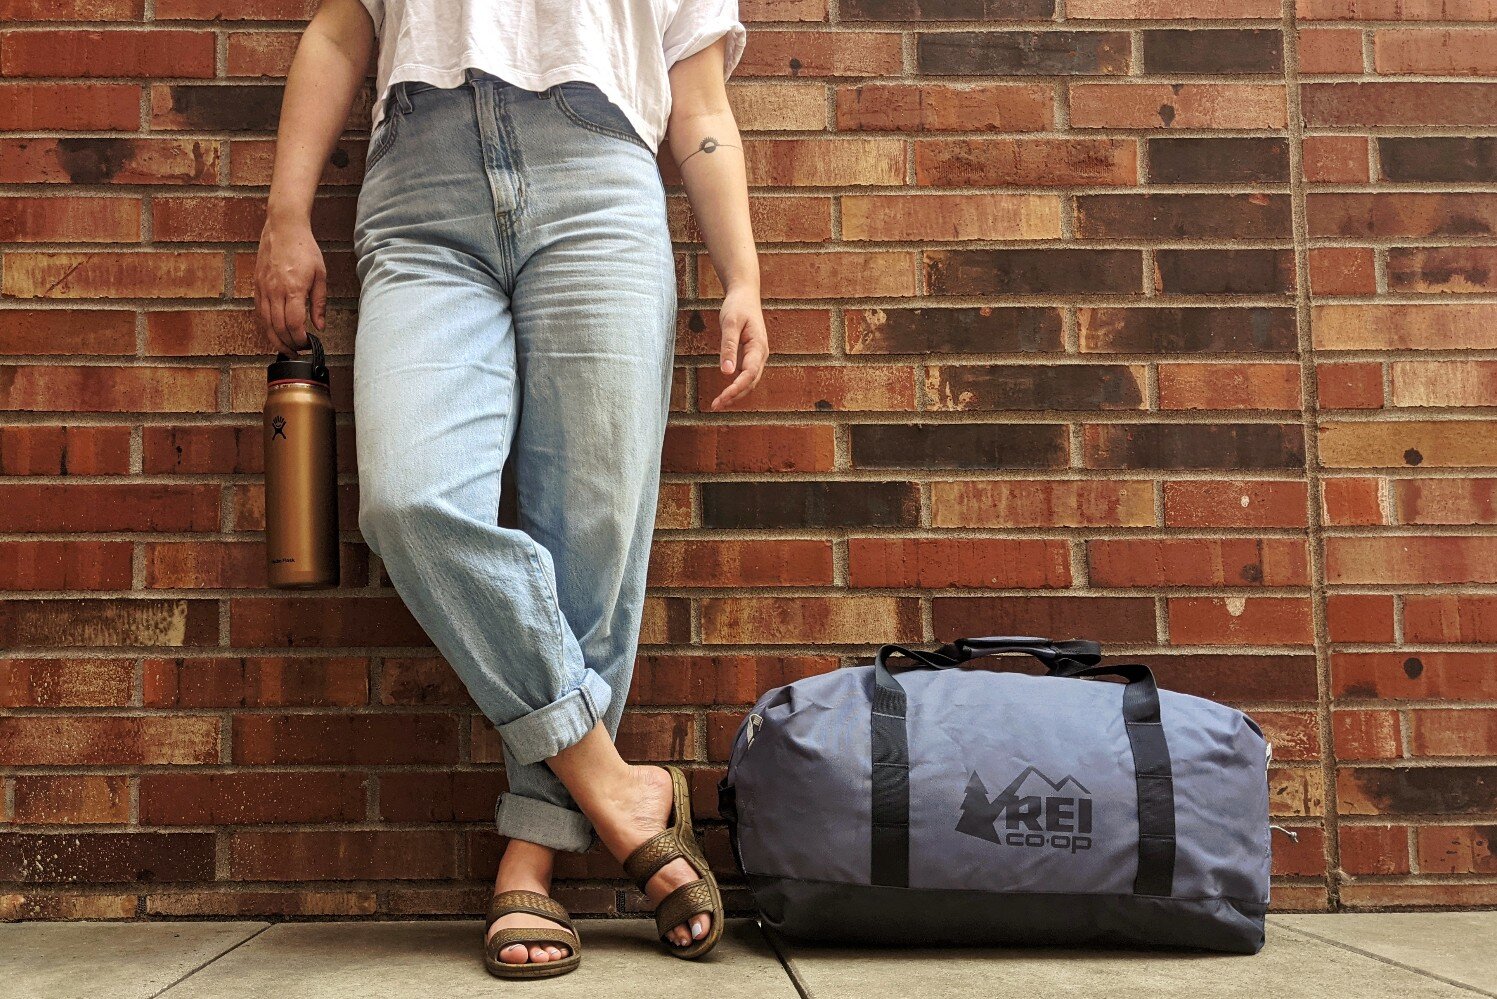 The REI Roadtripper 40 is an afforable duffel that’s great for everyday use